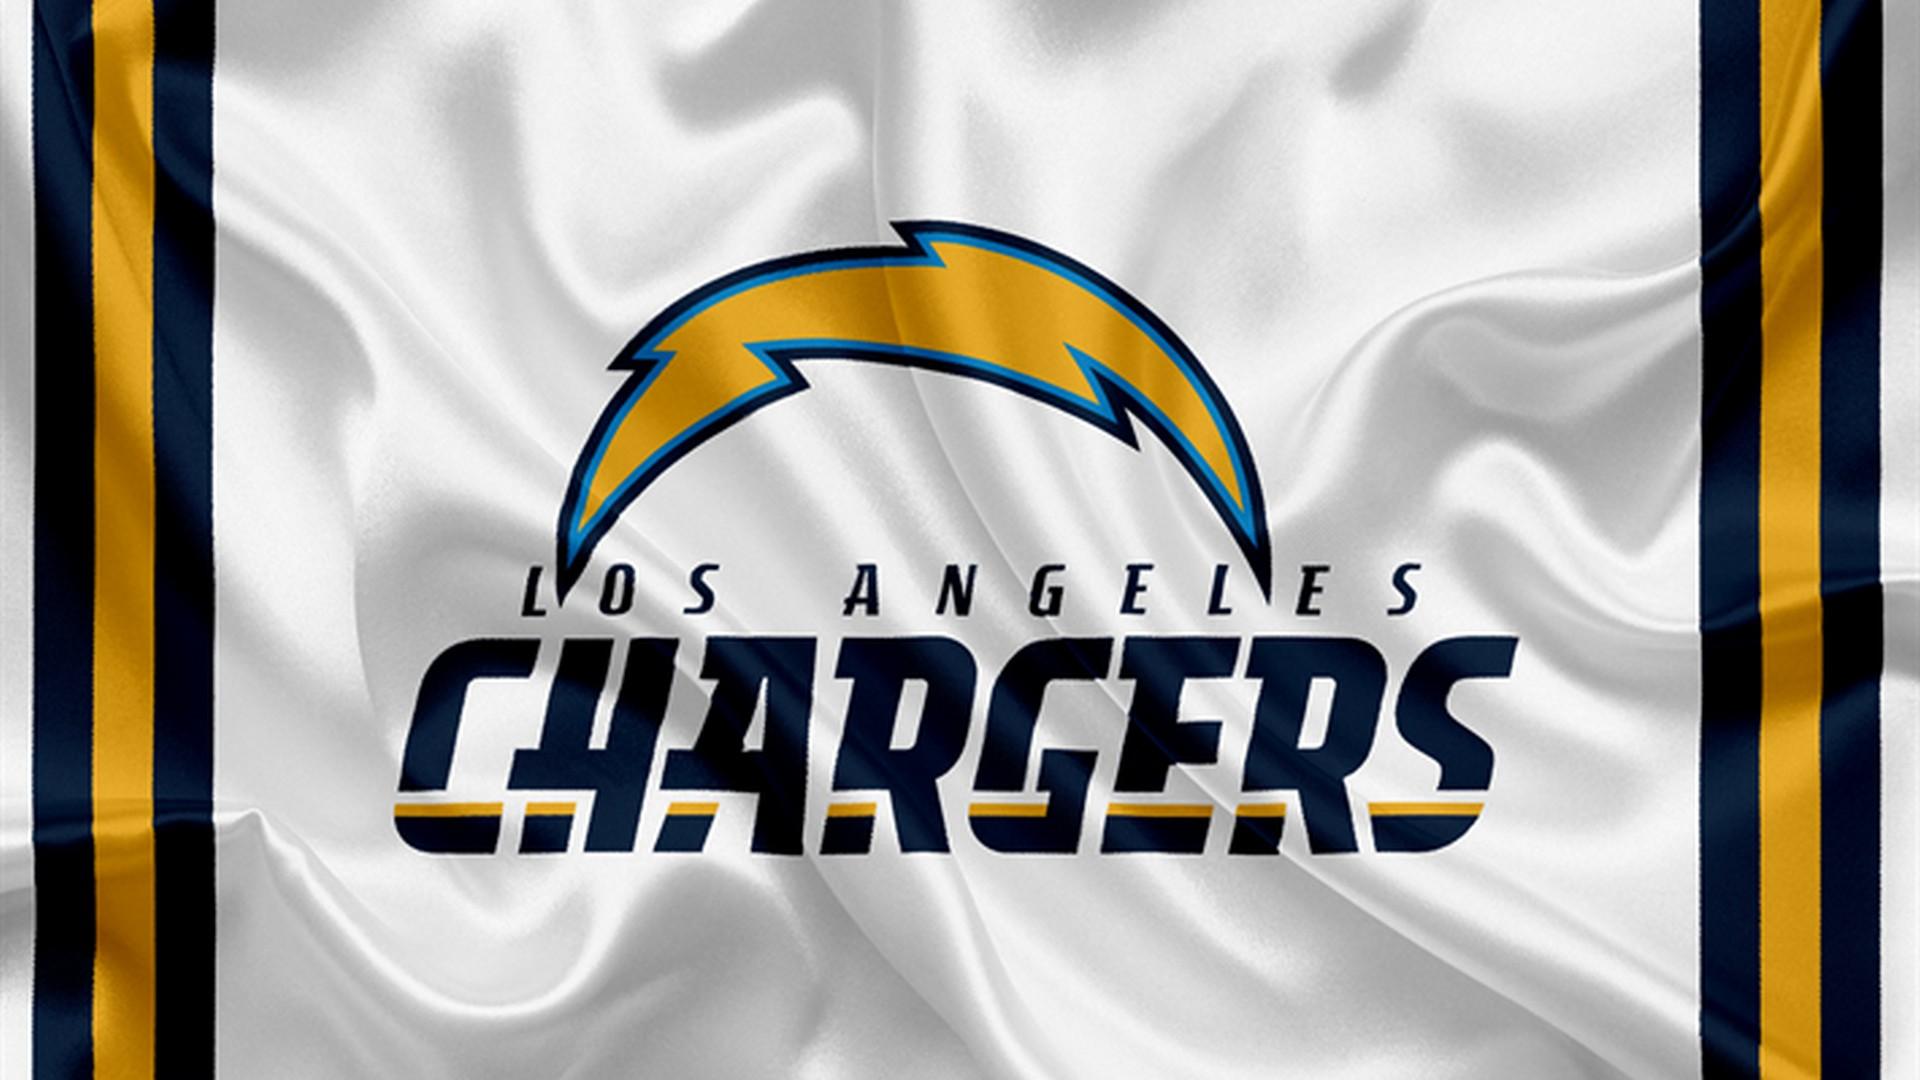 Free download HD Los Angeles Chargers Wallpaper 2019 NFL Football Wallpaper [1920x1080] for your Desktop, Mobile & Tablet. Explore Los Angeles Chargers 2018 Wallpaper. Los Angeles Chargers 2018 Wallpaper